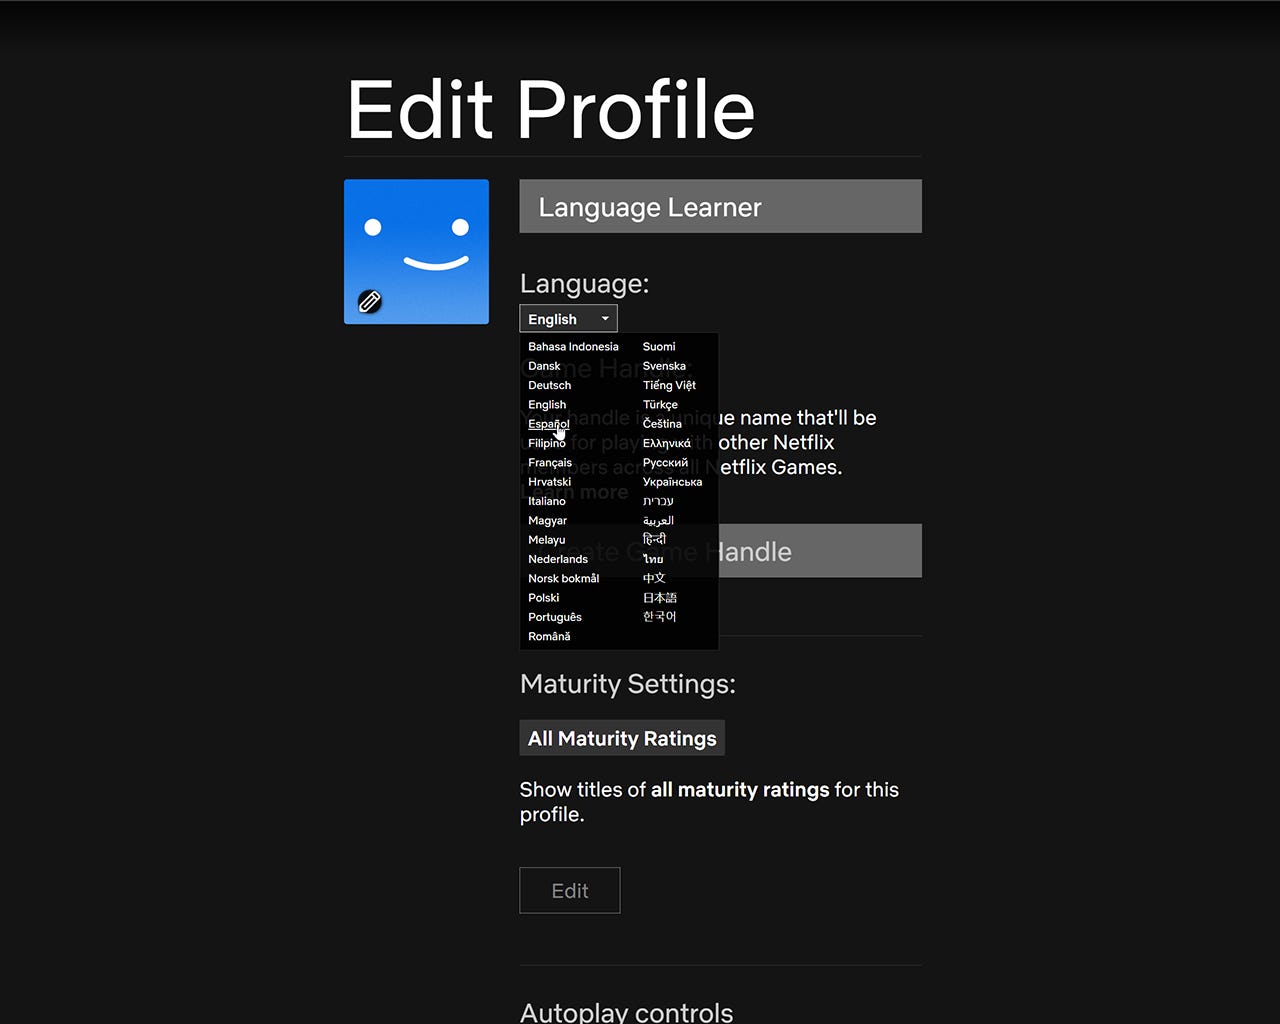 The Netflix "Edit Profile" page with the profile name in a text box at the top, and a Language dropdown box opened below showing available languages. Maturity Settings appears immediately below the expanded Language dropdown list.